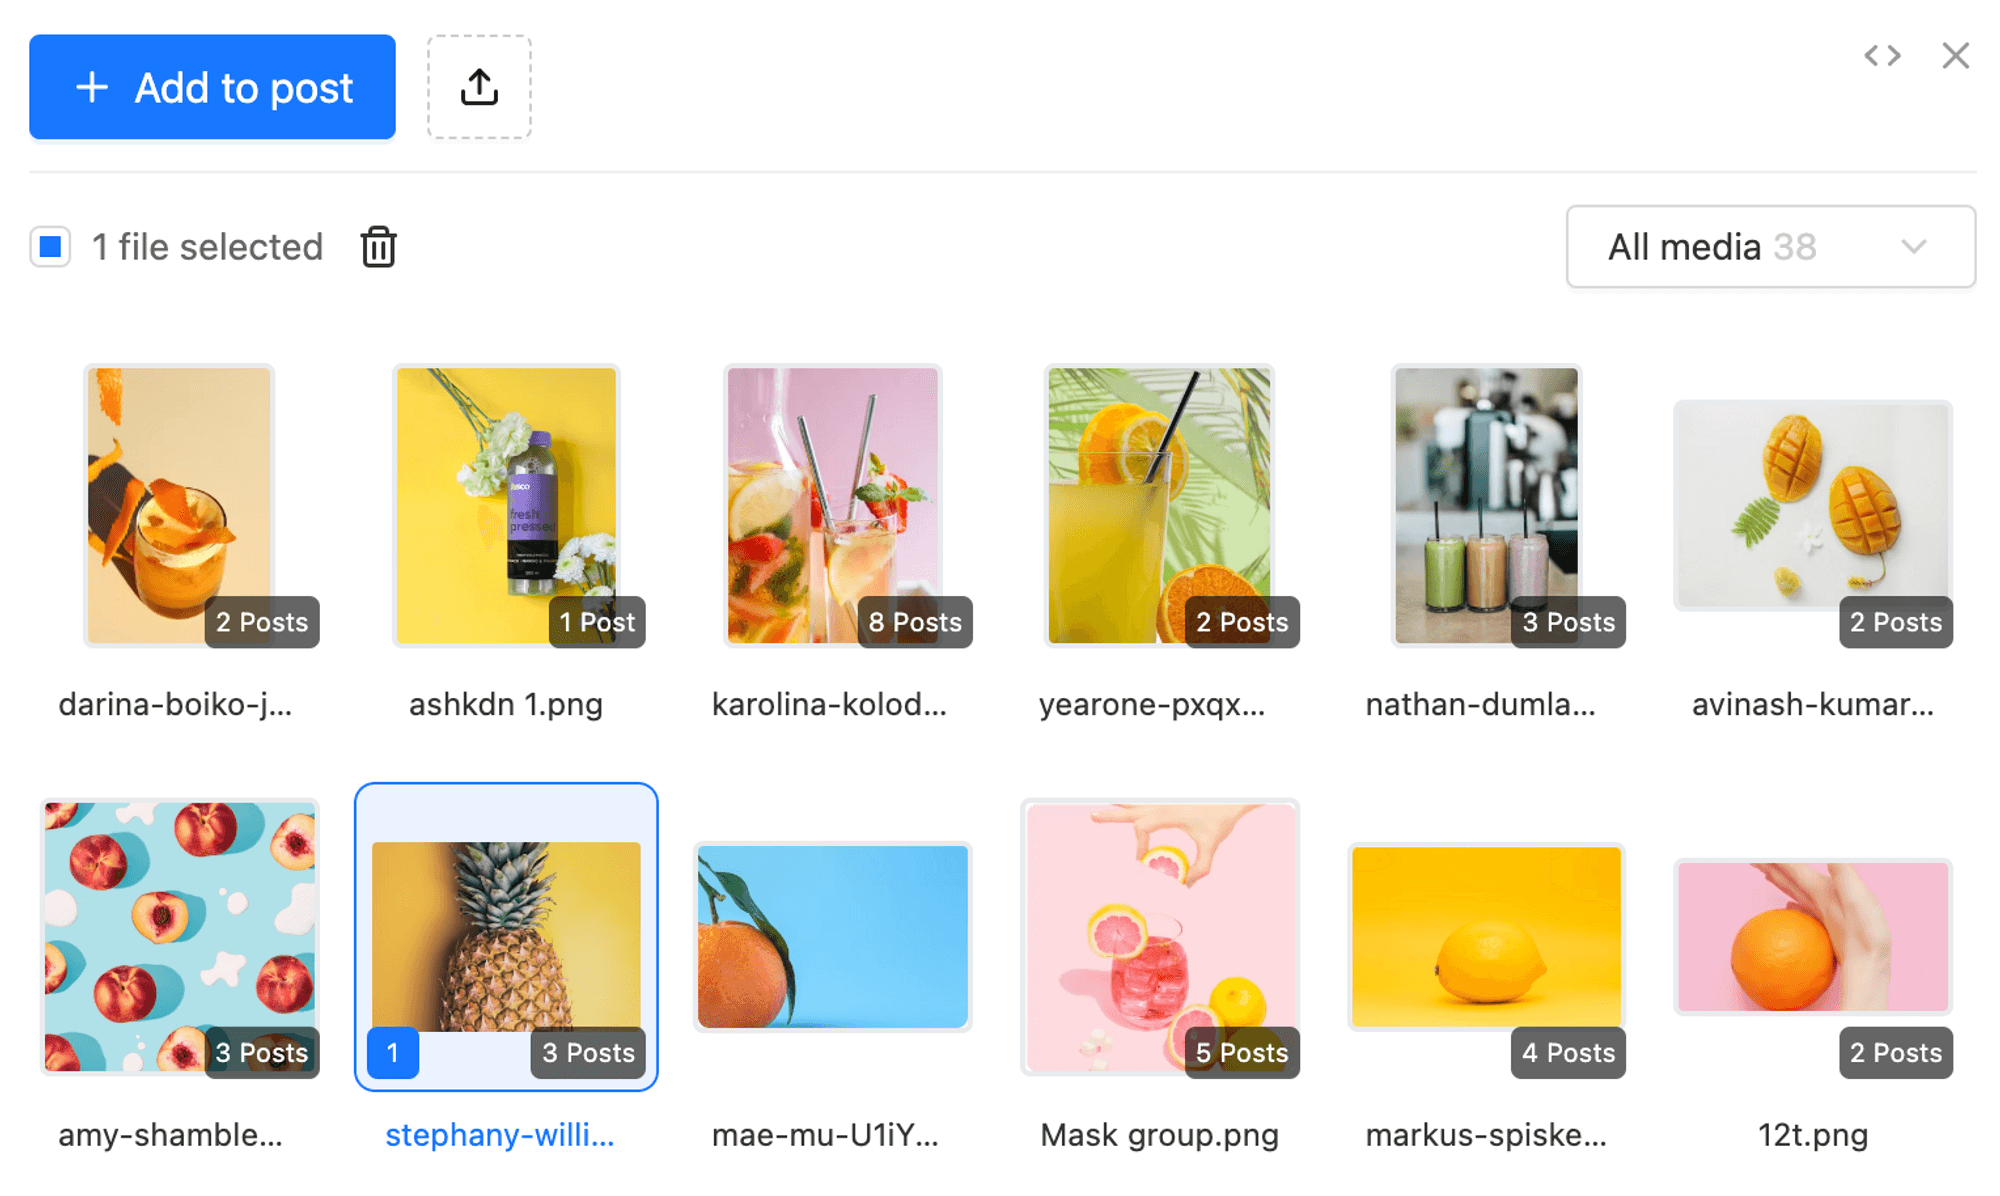 Planable's media library with fruit photos for social media posts